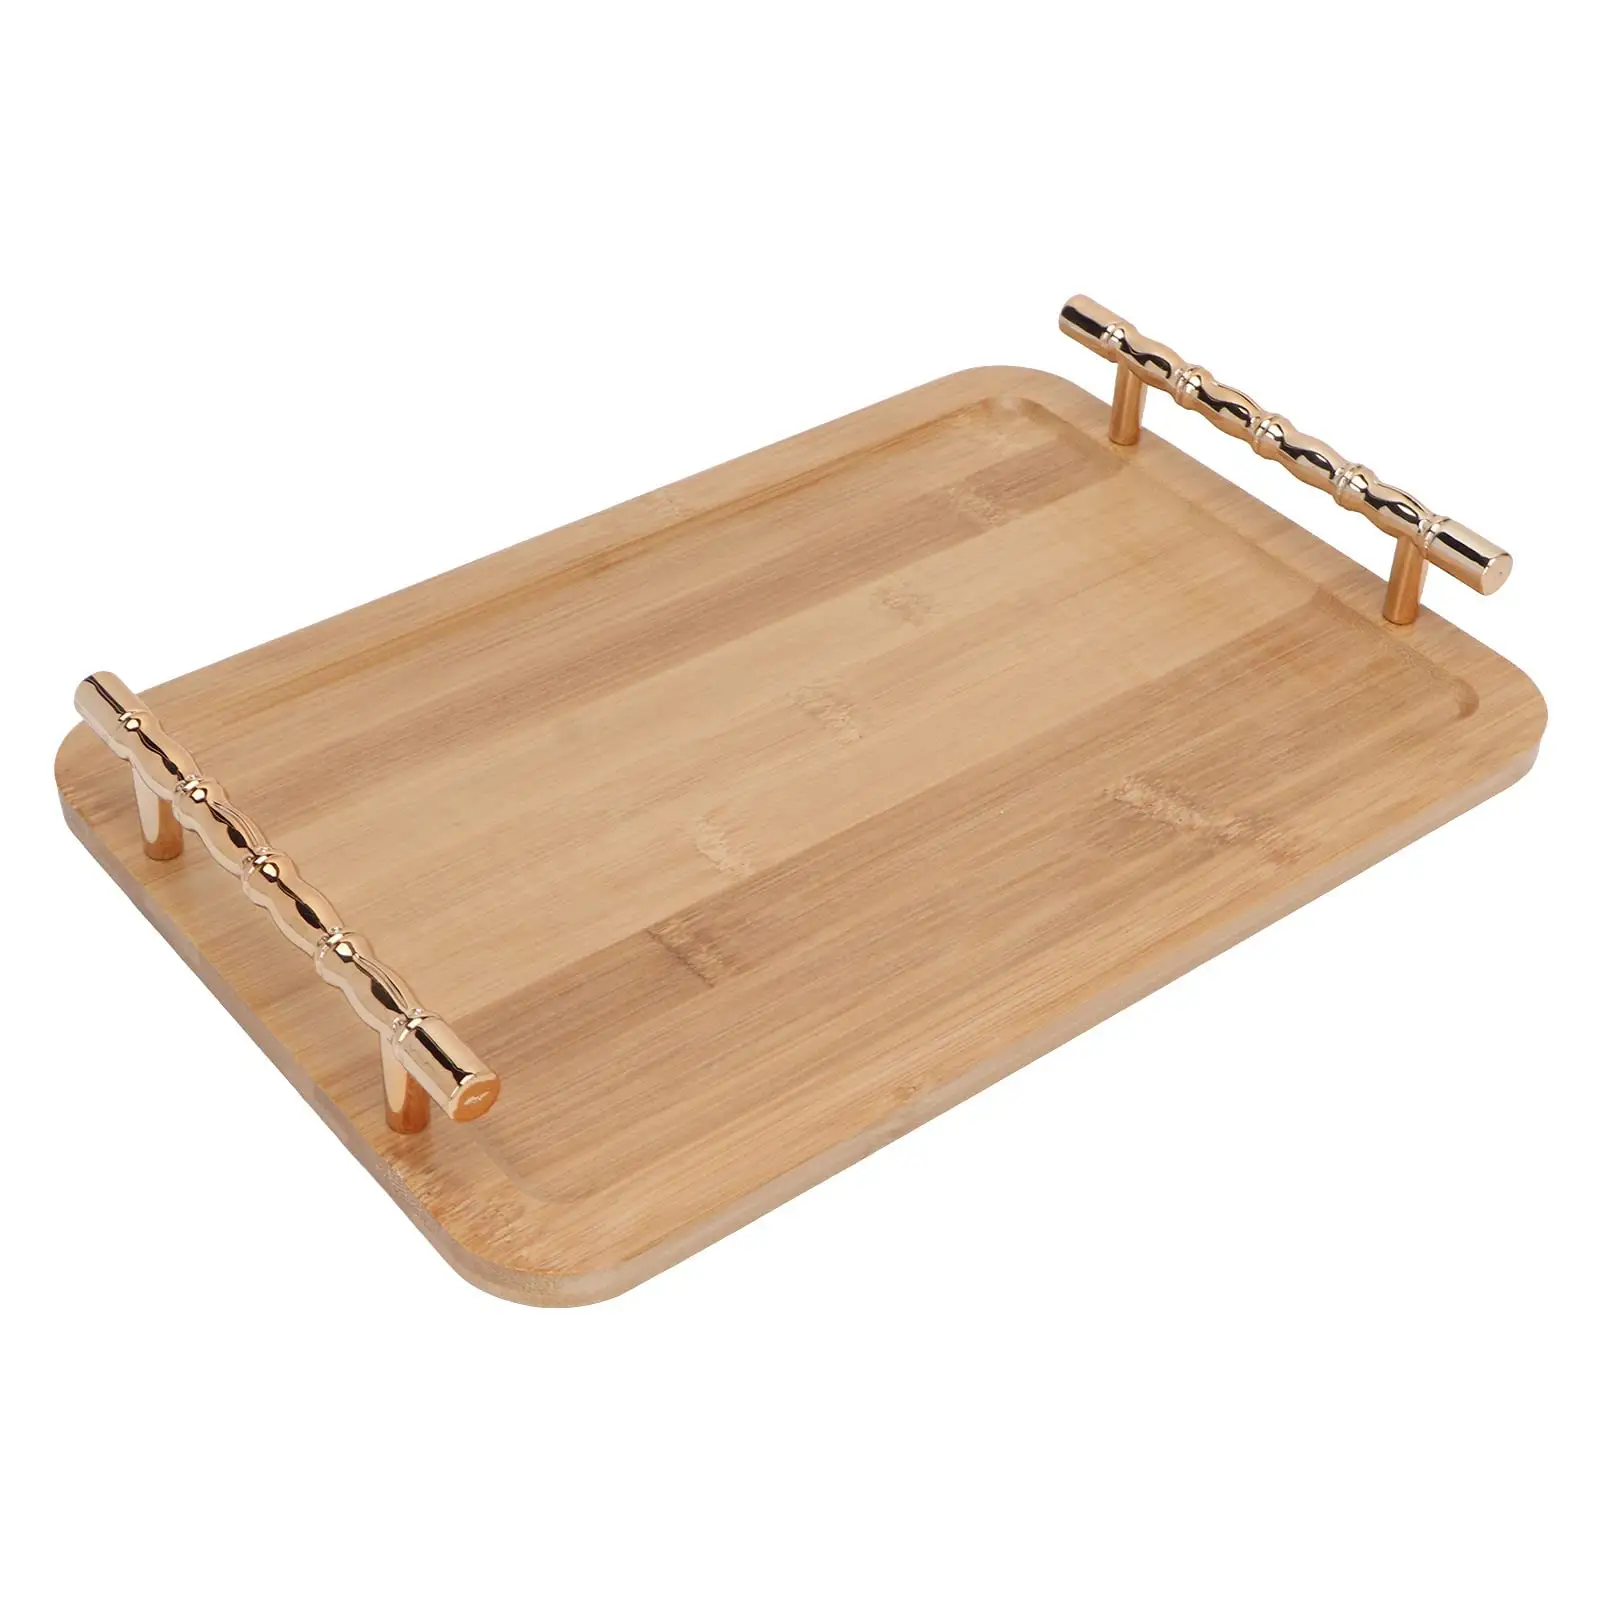 Custom Multifunctional Rectangular Bamboo Serving Tray with 2 Handles for Working